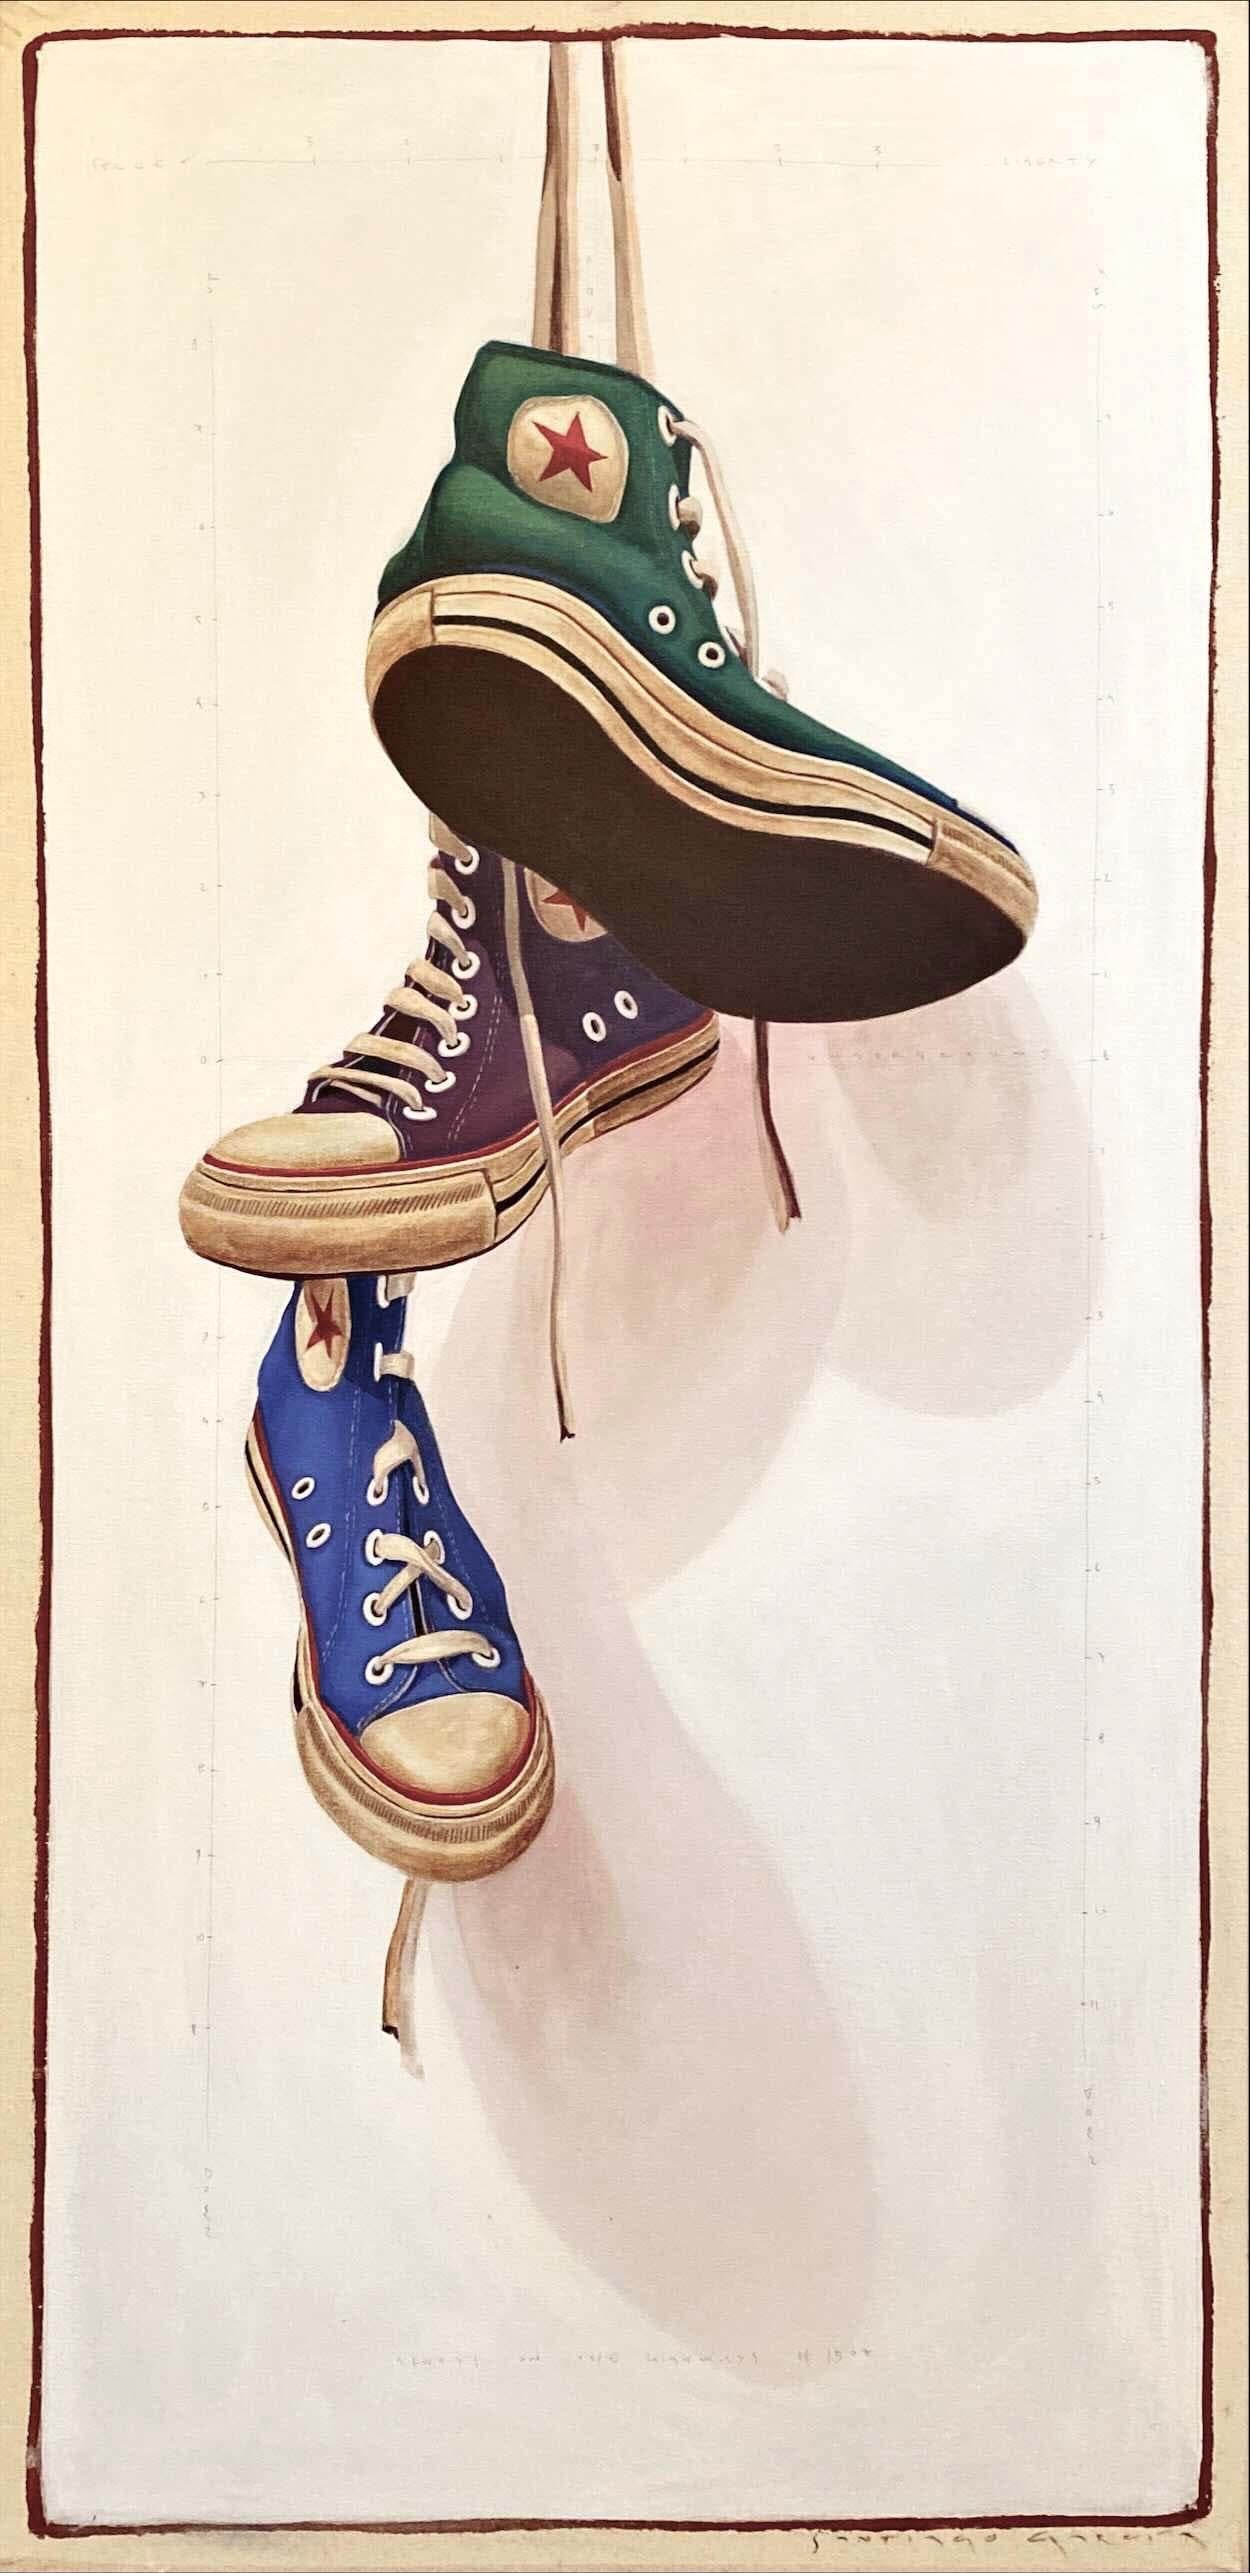 Santiago Garcia - "#1507" photorealistic oil painting of green, purple, and  blue converse sneakers For Sale at 1stDibs